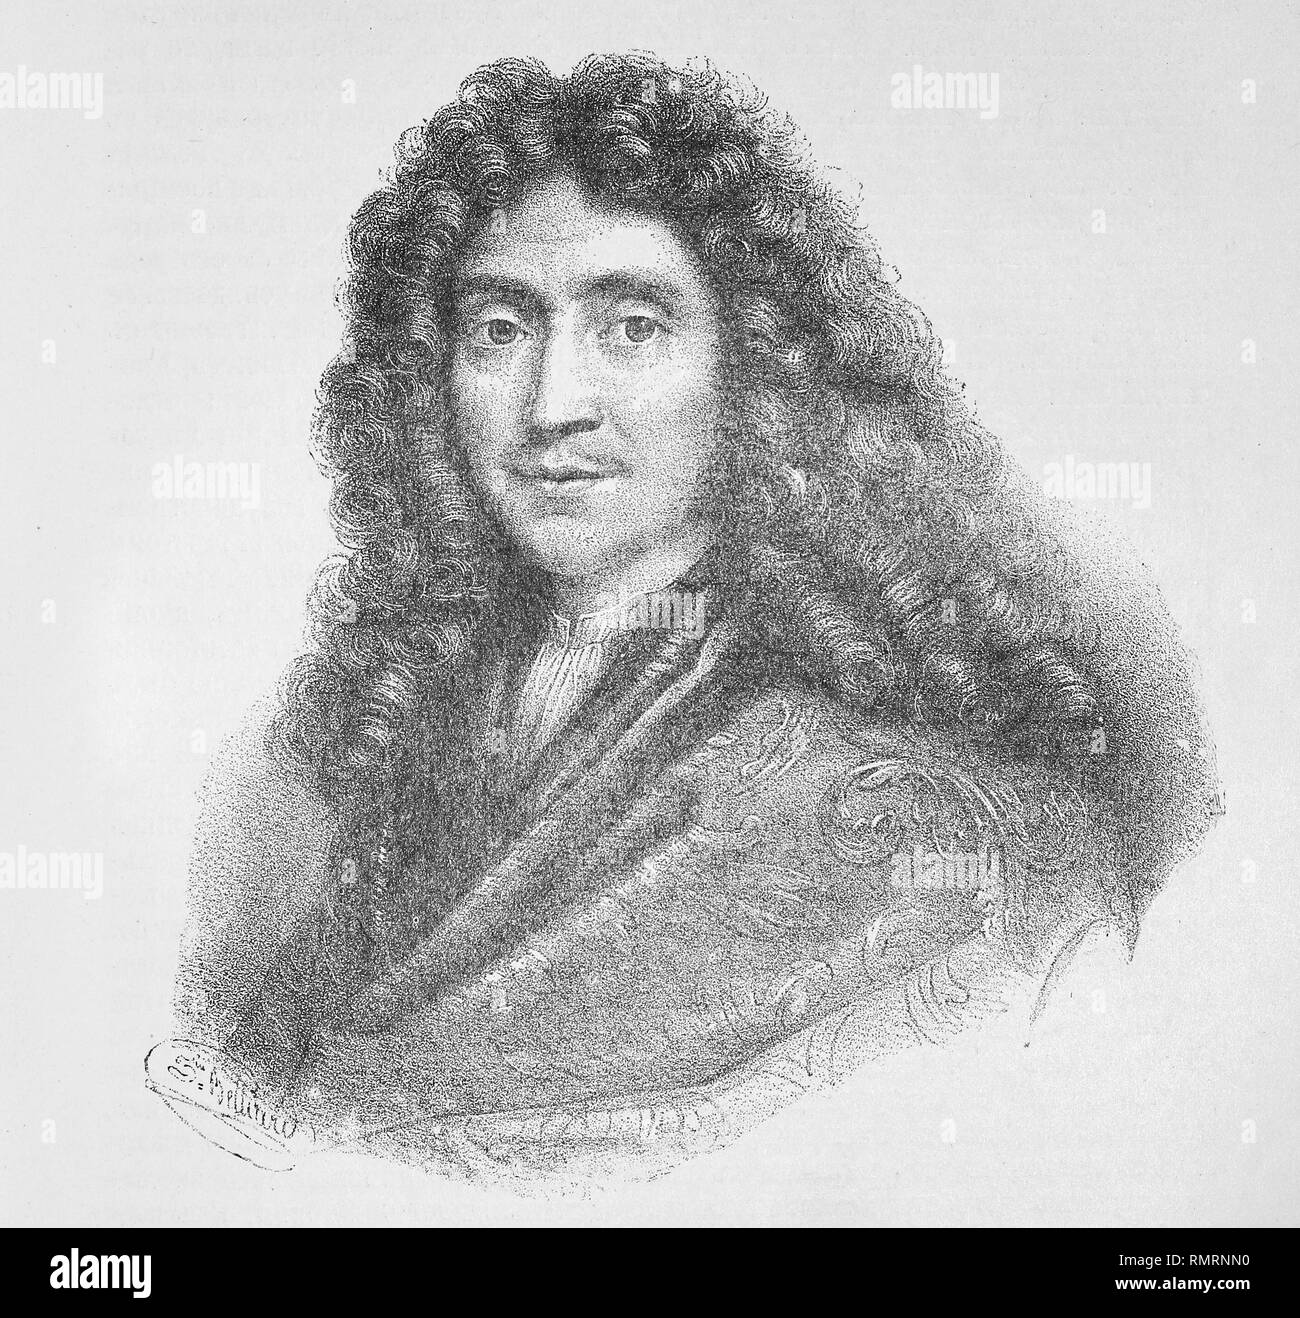 Portrait of Jean-Baptiste Poquelin (stage name Moliere). Medieval engraving. Stock Photo